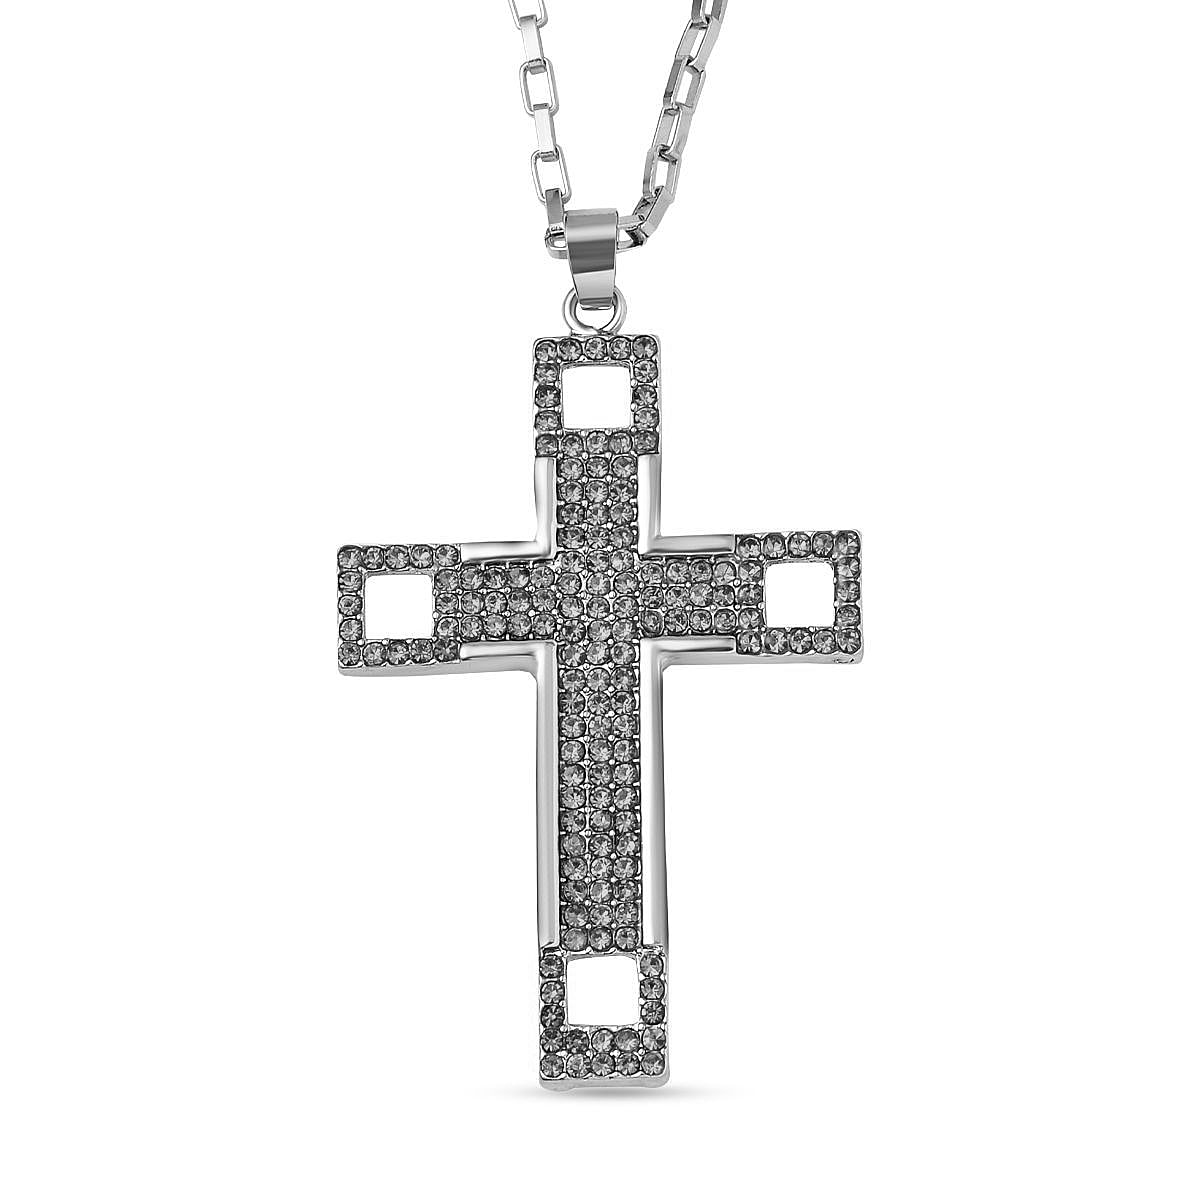 White Austrian Crystal Cross Pendant with Chain (Size 29-2 Inch Ext.) in  Silver Tone - 4119593 - TJC